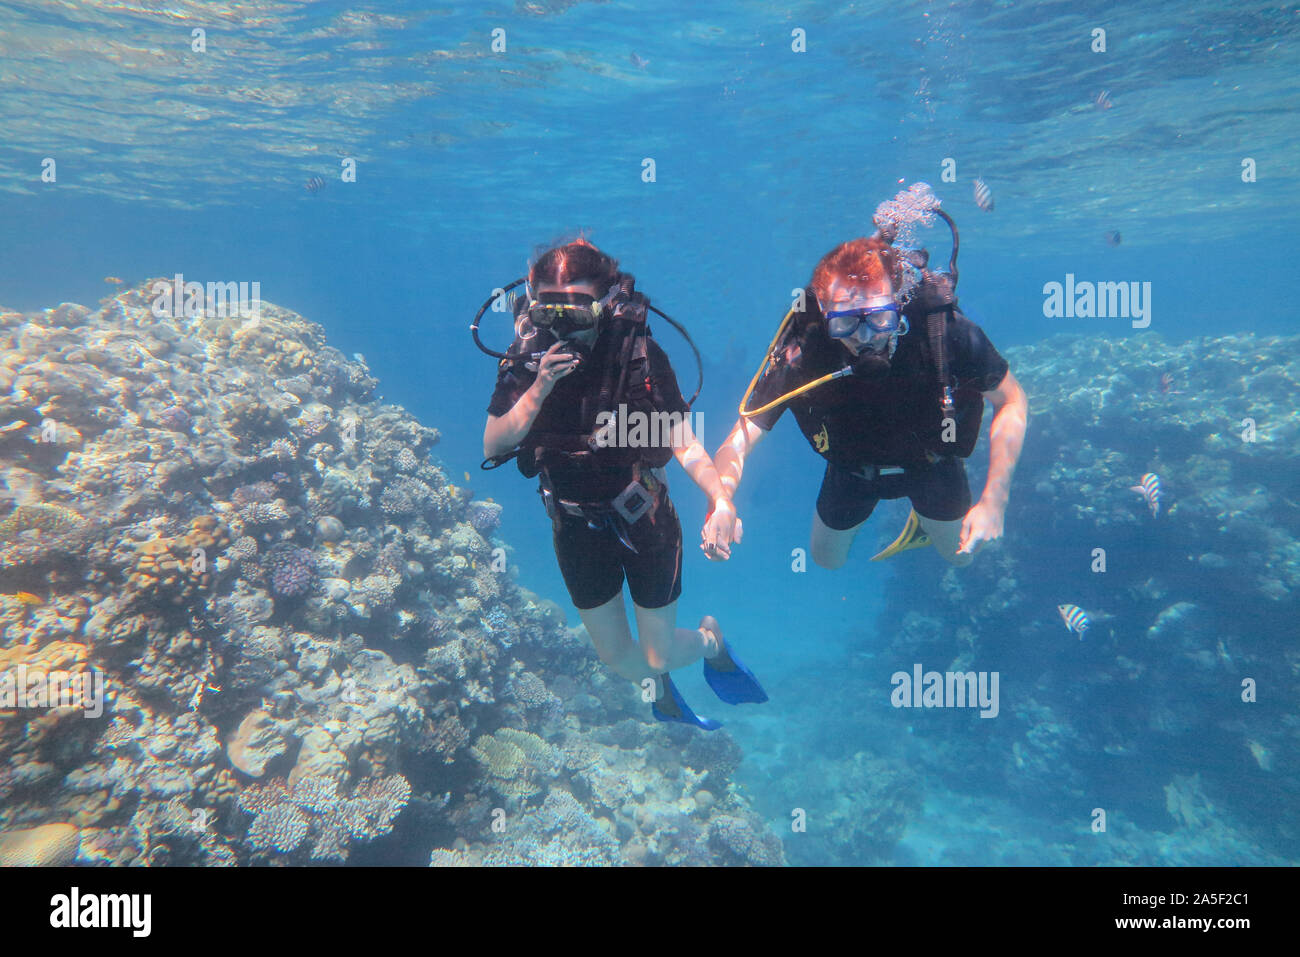 Couple is swiming under the sea water. Travel lifestyle, water sport outdoor adventure concept. Stock Photo